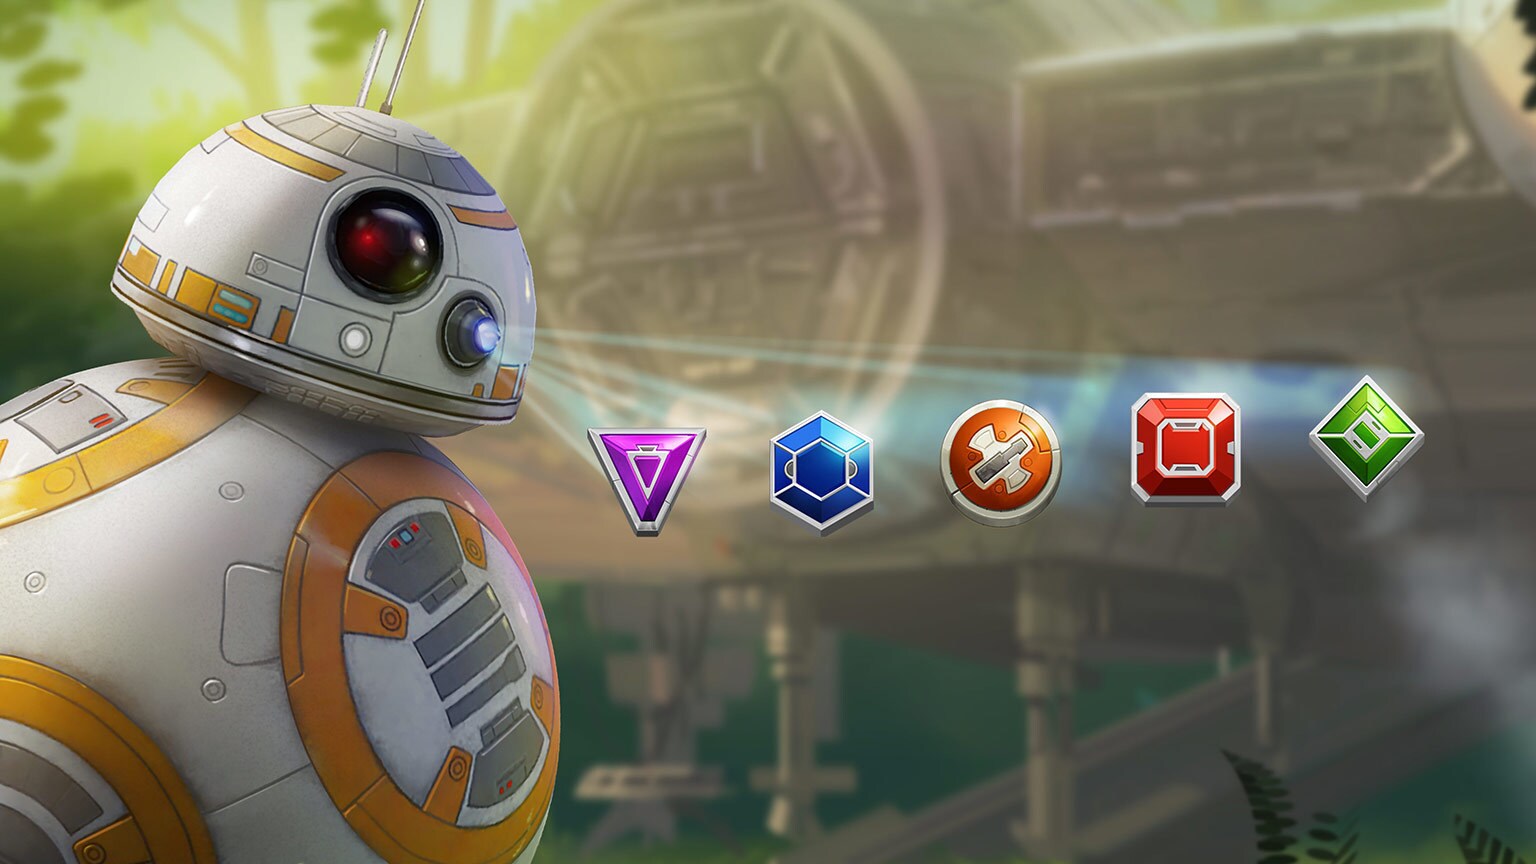 Calling All Astromechs: Announcing Star Wars: Puzzle Droids Mobile Game